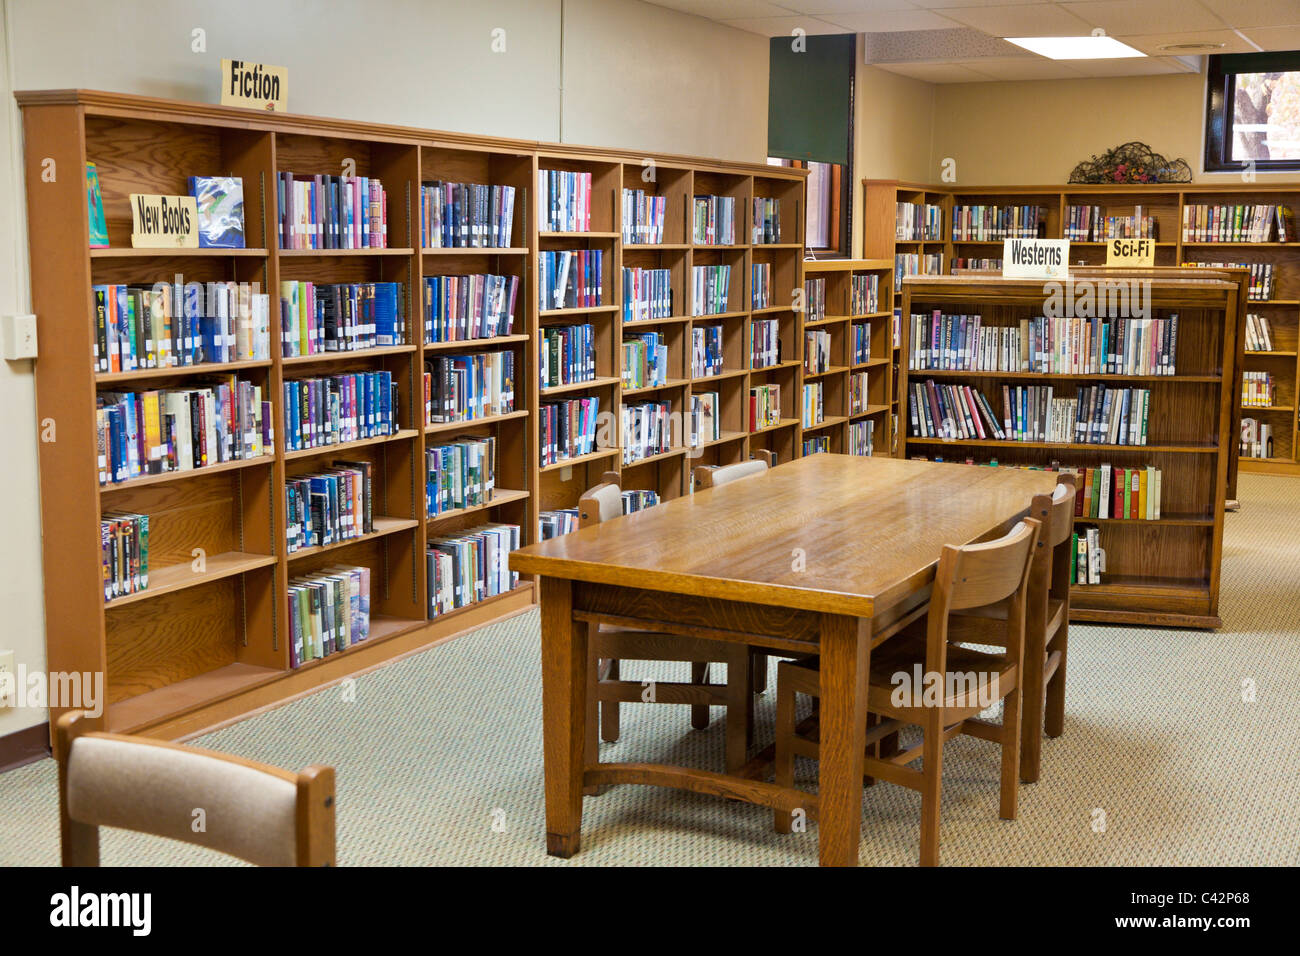 Books fill shelves at a small town library in Rockville, Indiana, USA